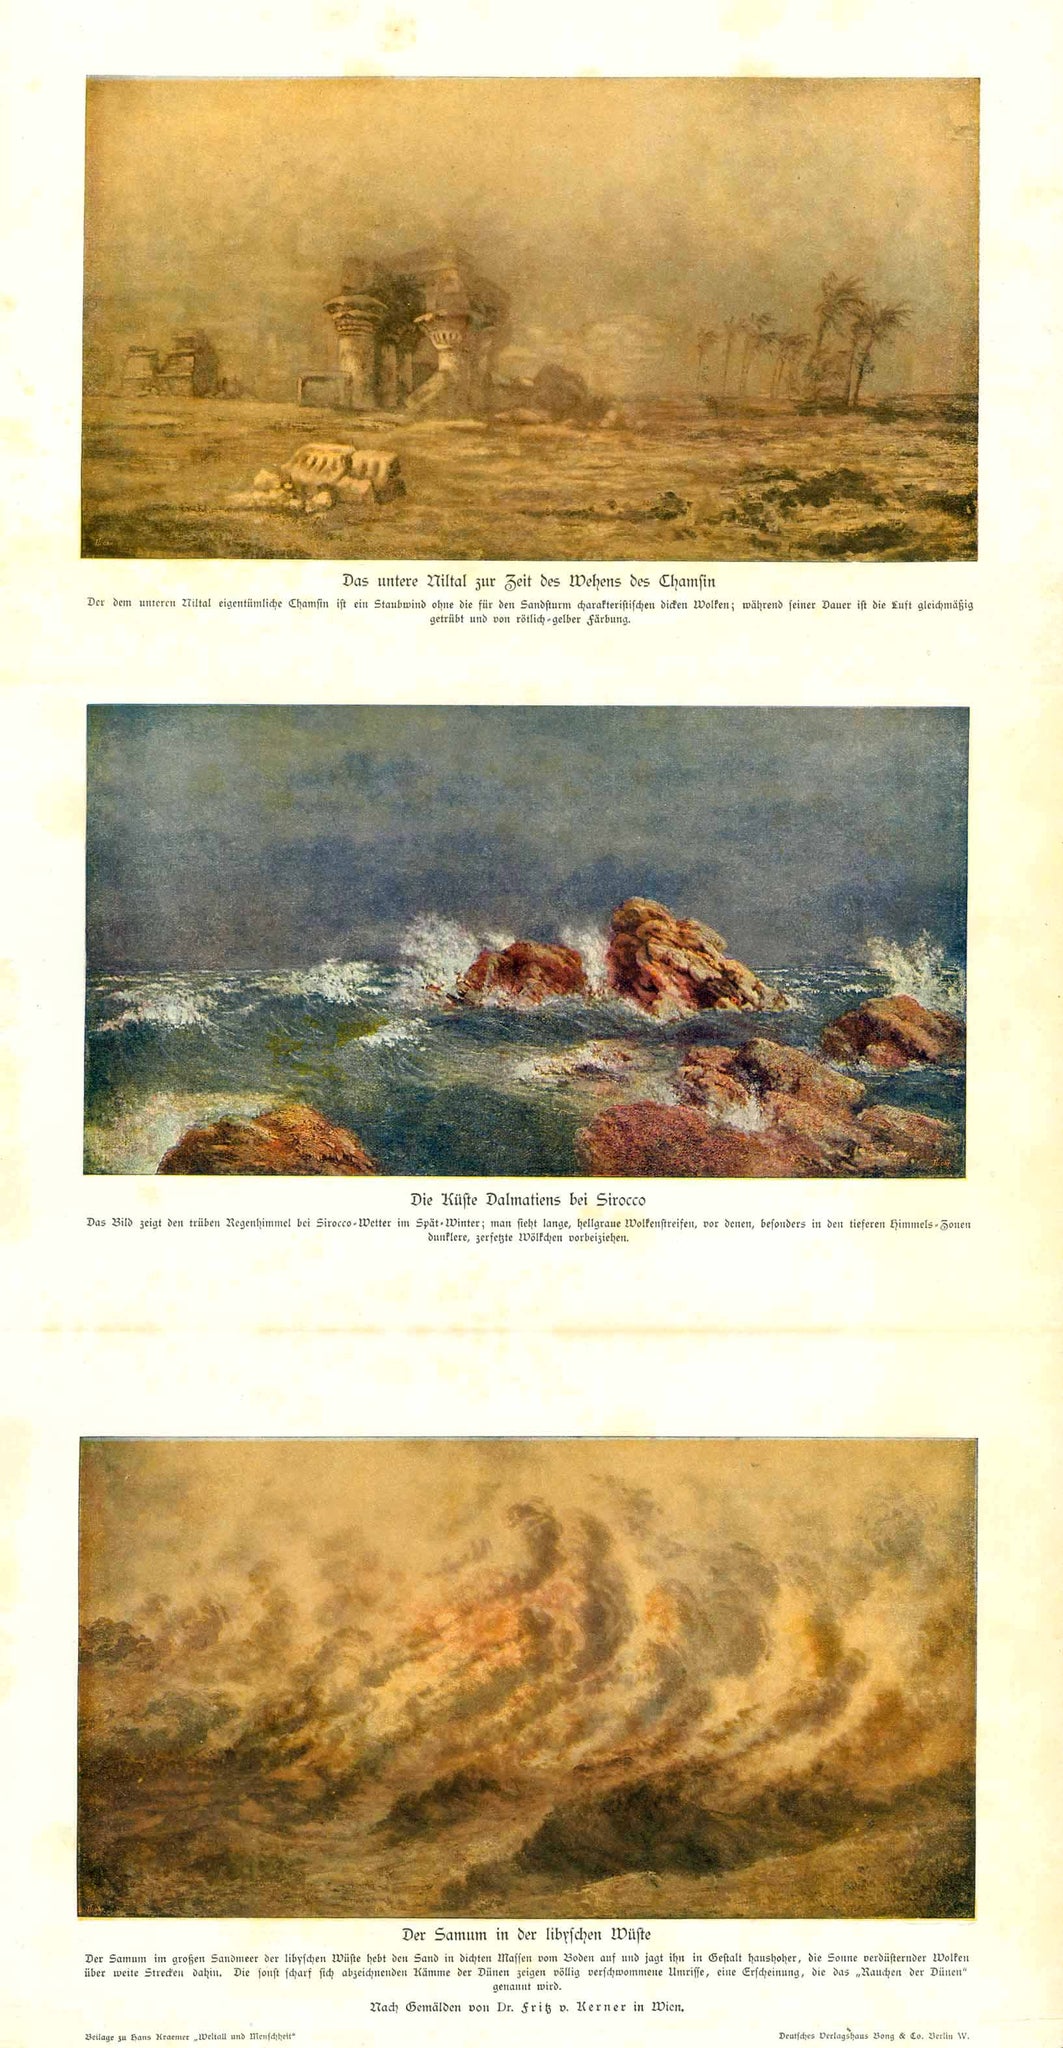 Upper image:"Das untere Niltal zur Zeit des Wehens des Chamsin"  Middle image; "Die Kueste Dalmatiens bei Sirocco"  Lower image: "Der Samum in der libyschen Wueste"  Three lithographs on a long fold-out page attached together.  All three lithographs show storm winds.